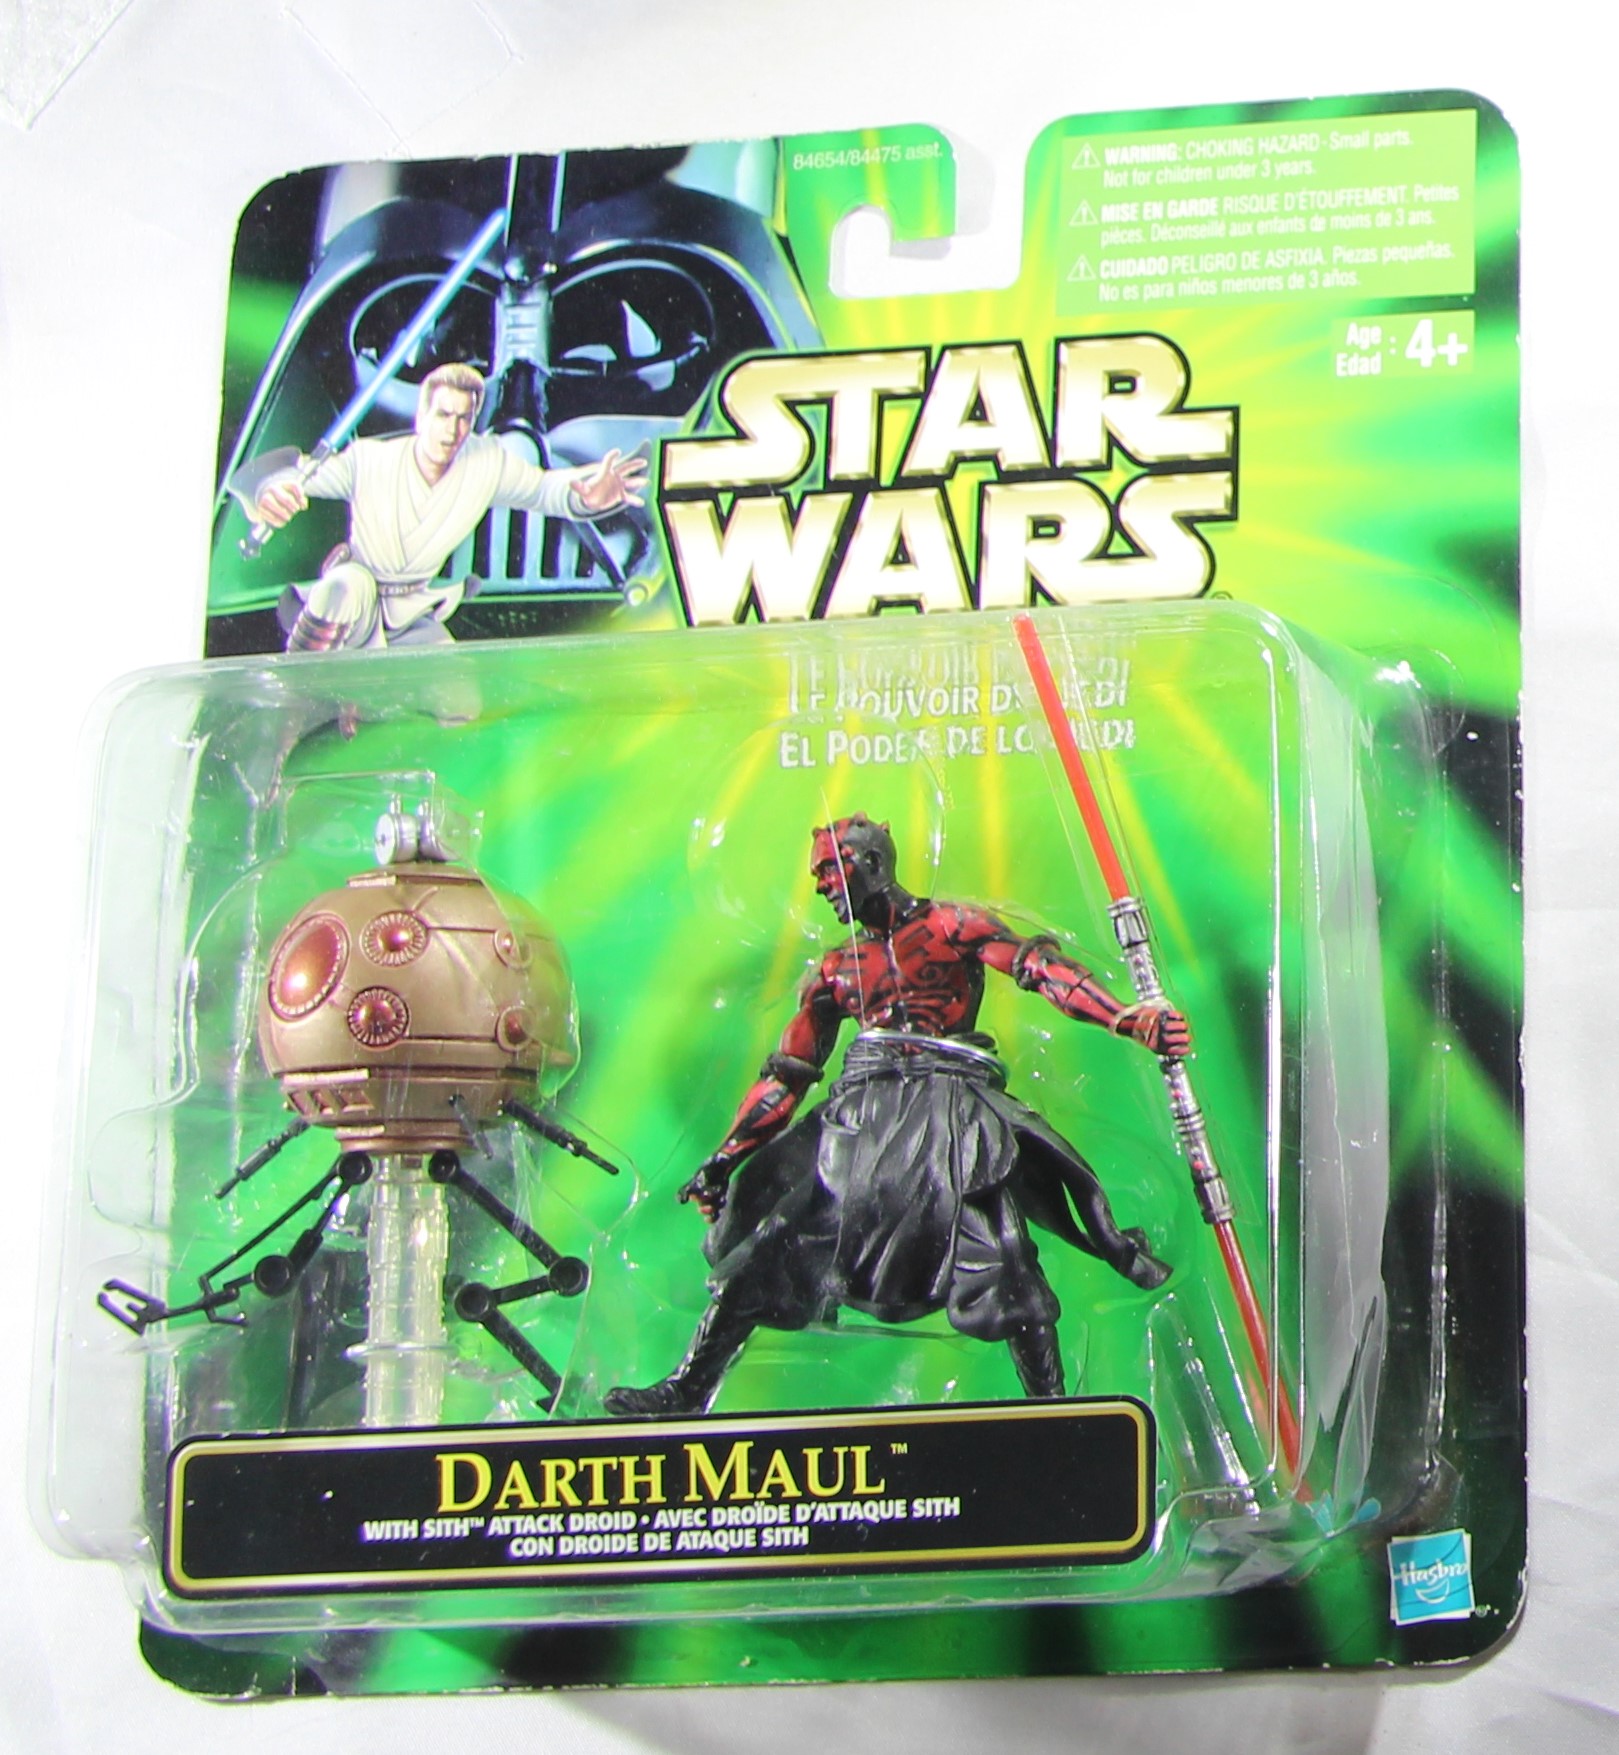 Darth Maul with Sith Attack Droid